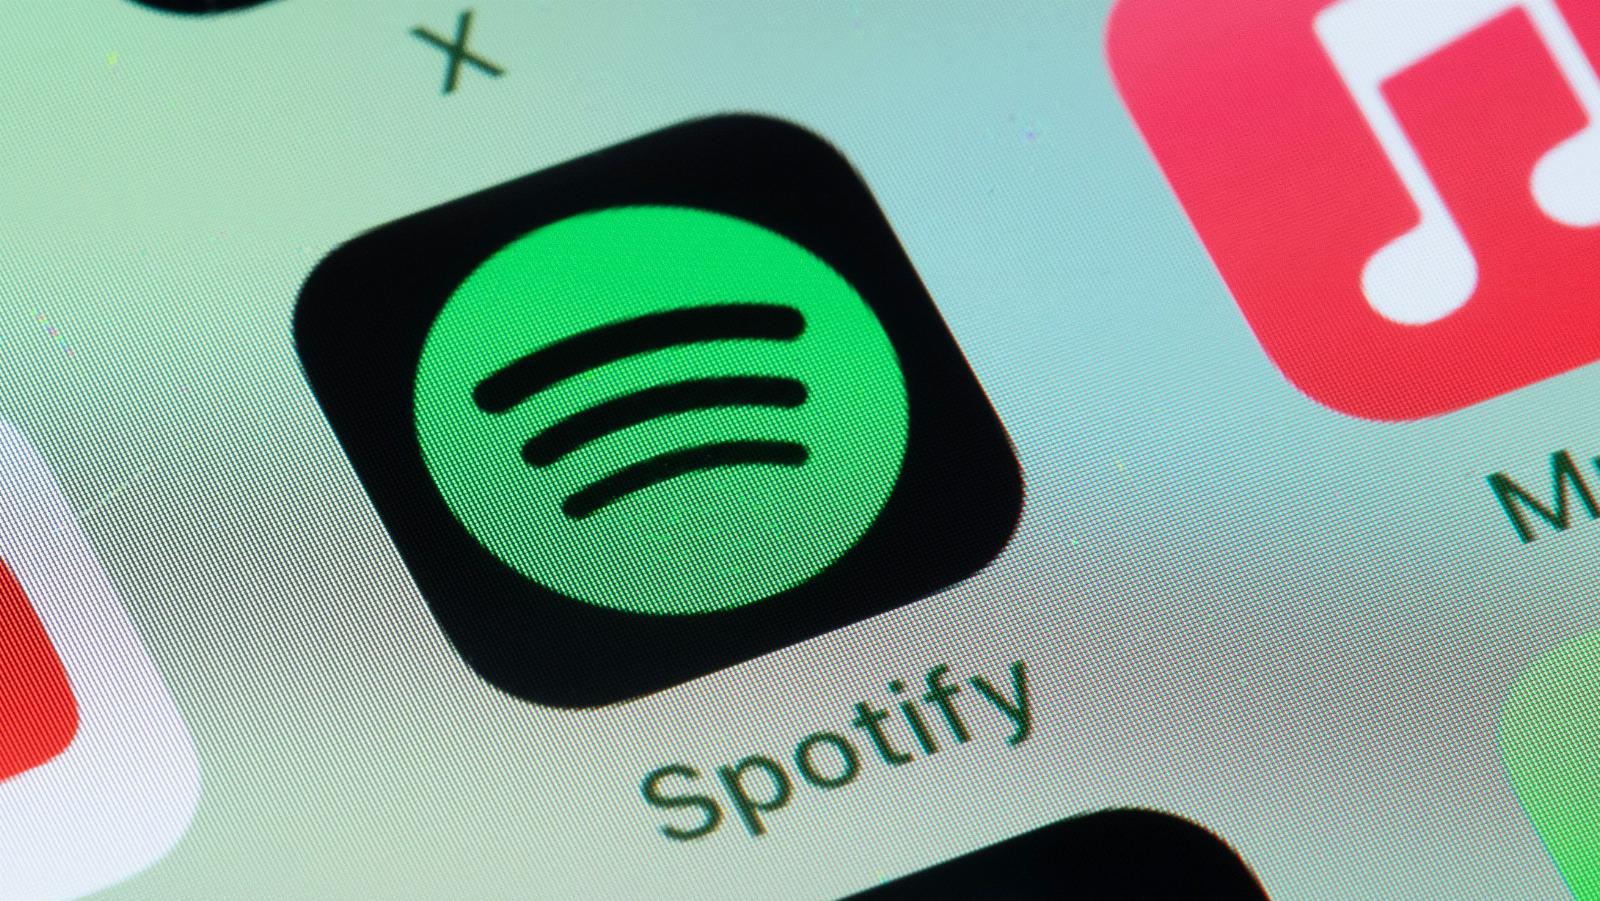 Spotify CEO says company is in ‘early days’ of hi-fi audio plans